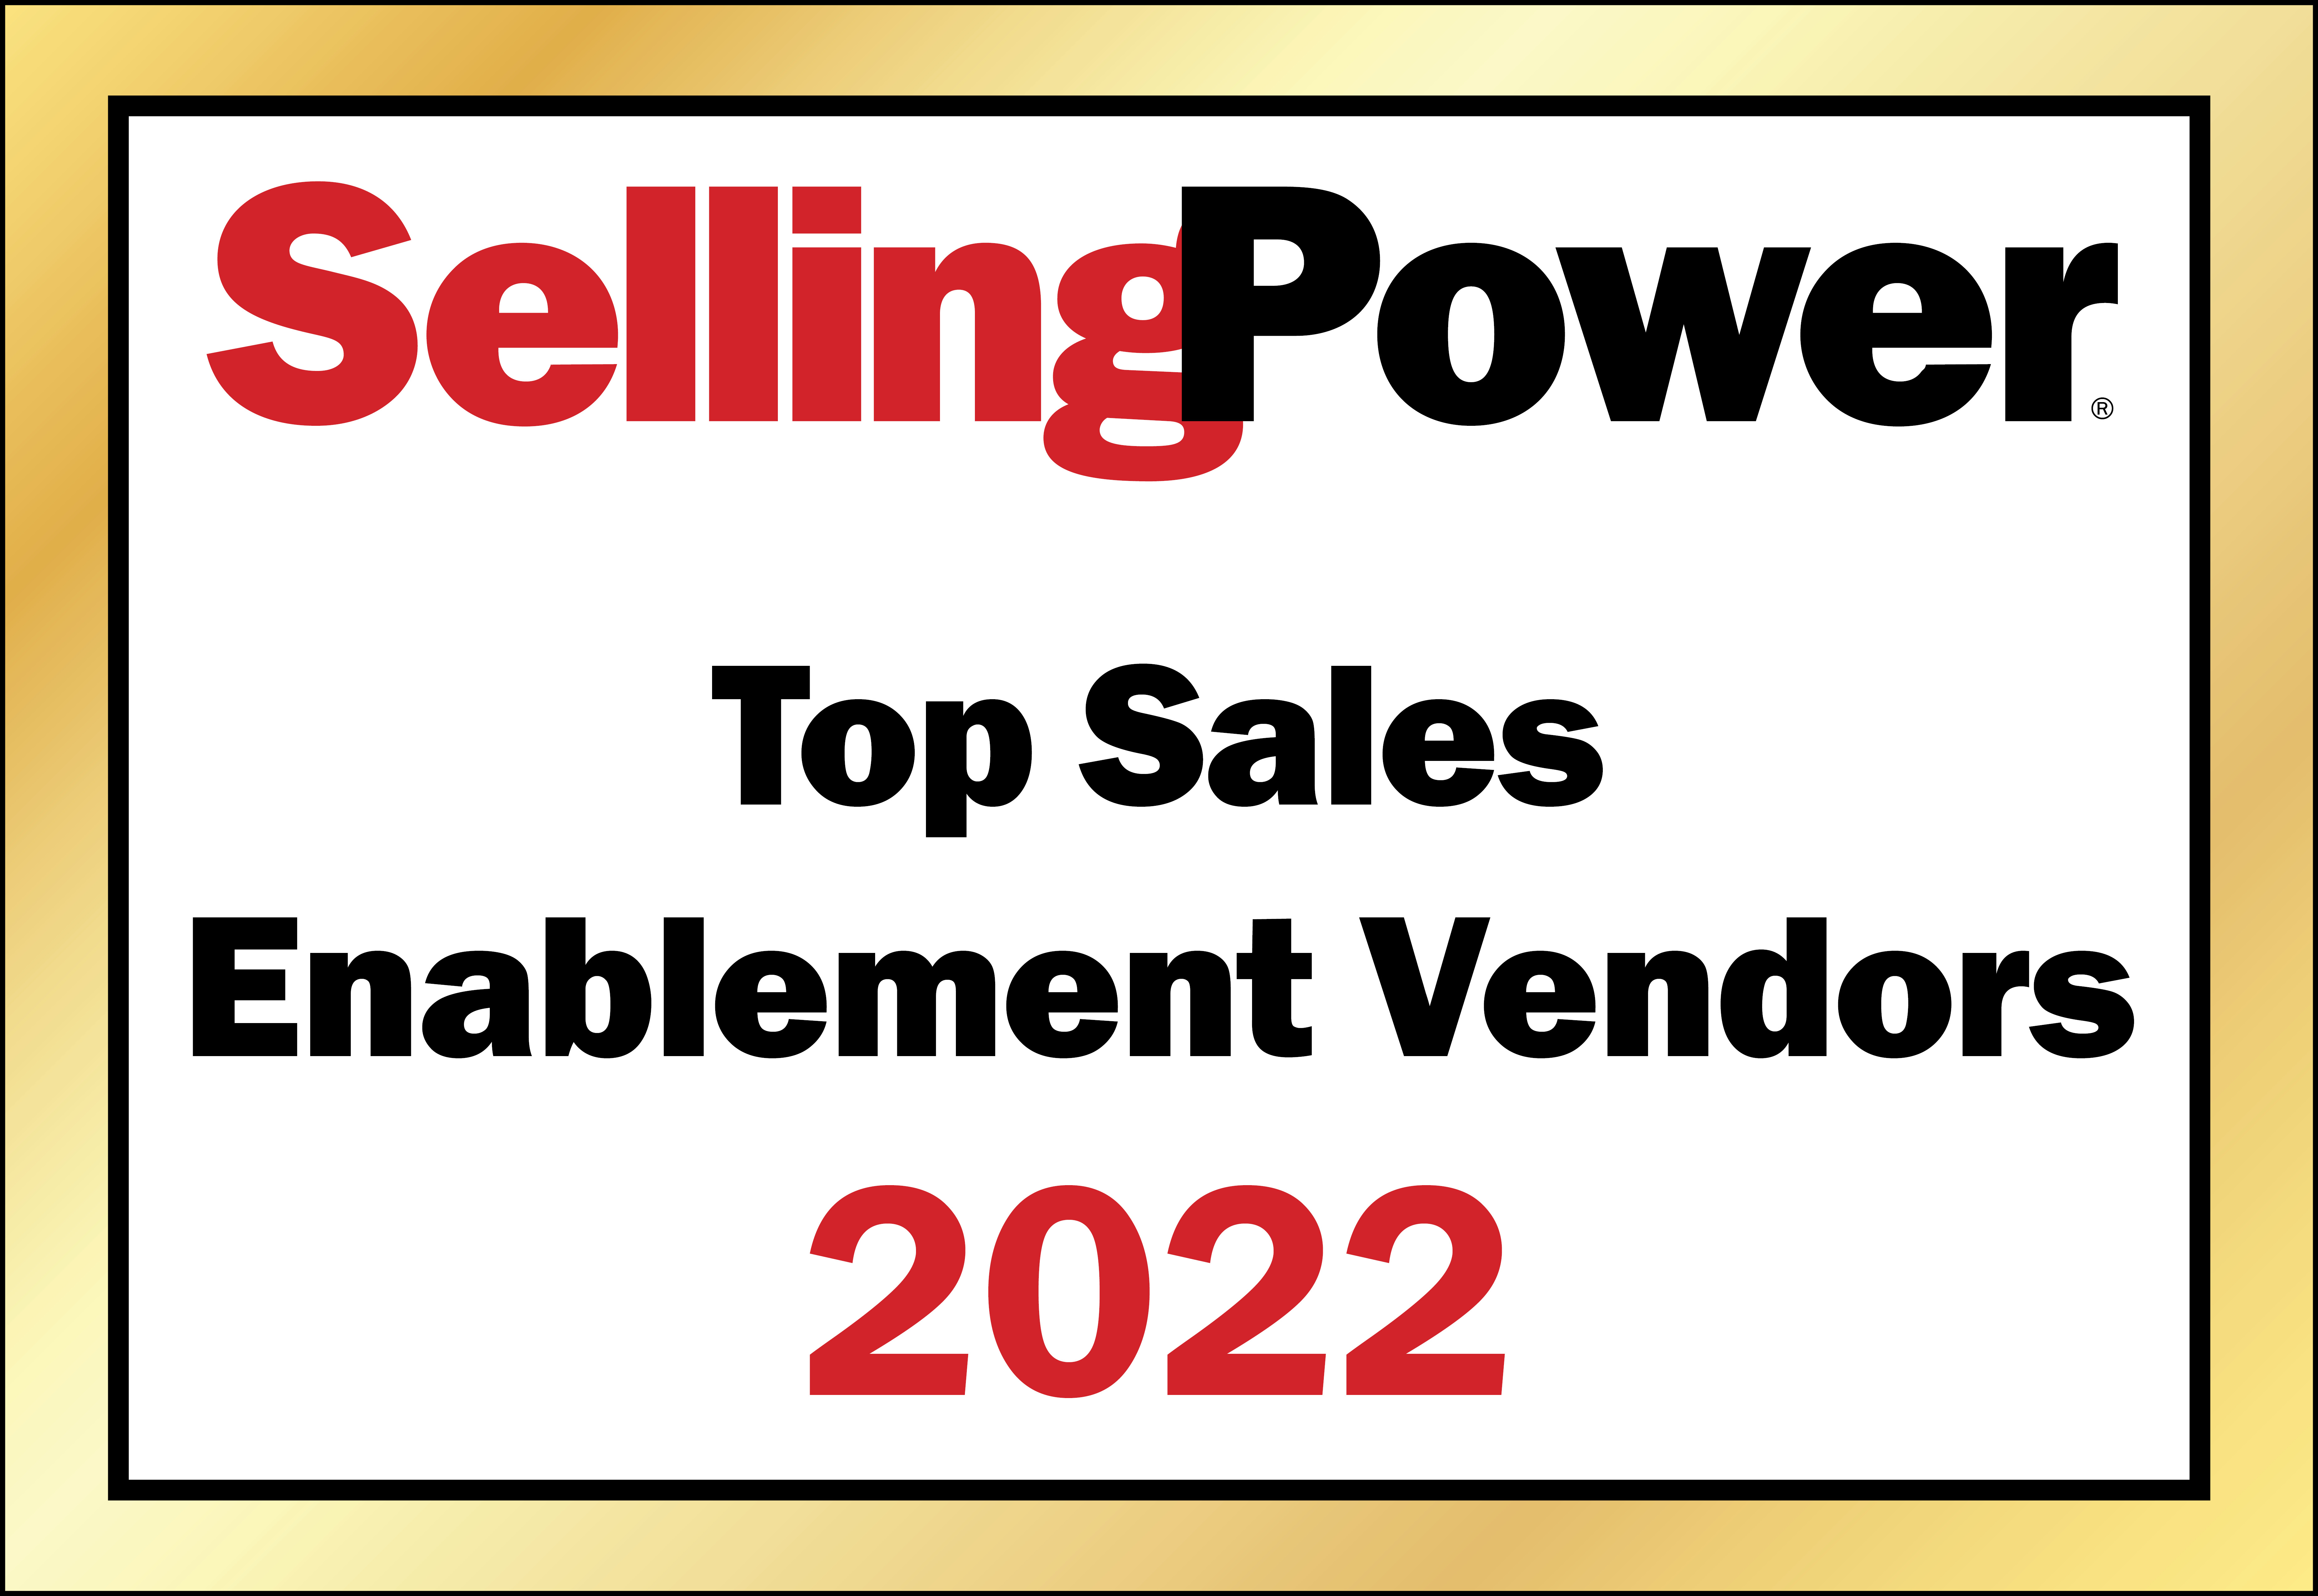 Logo for the Selling Power Top Sales Enablement Vendors in 2022